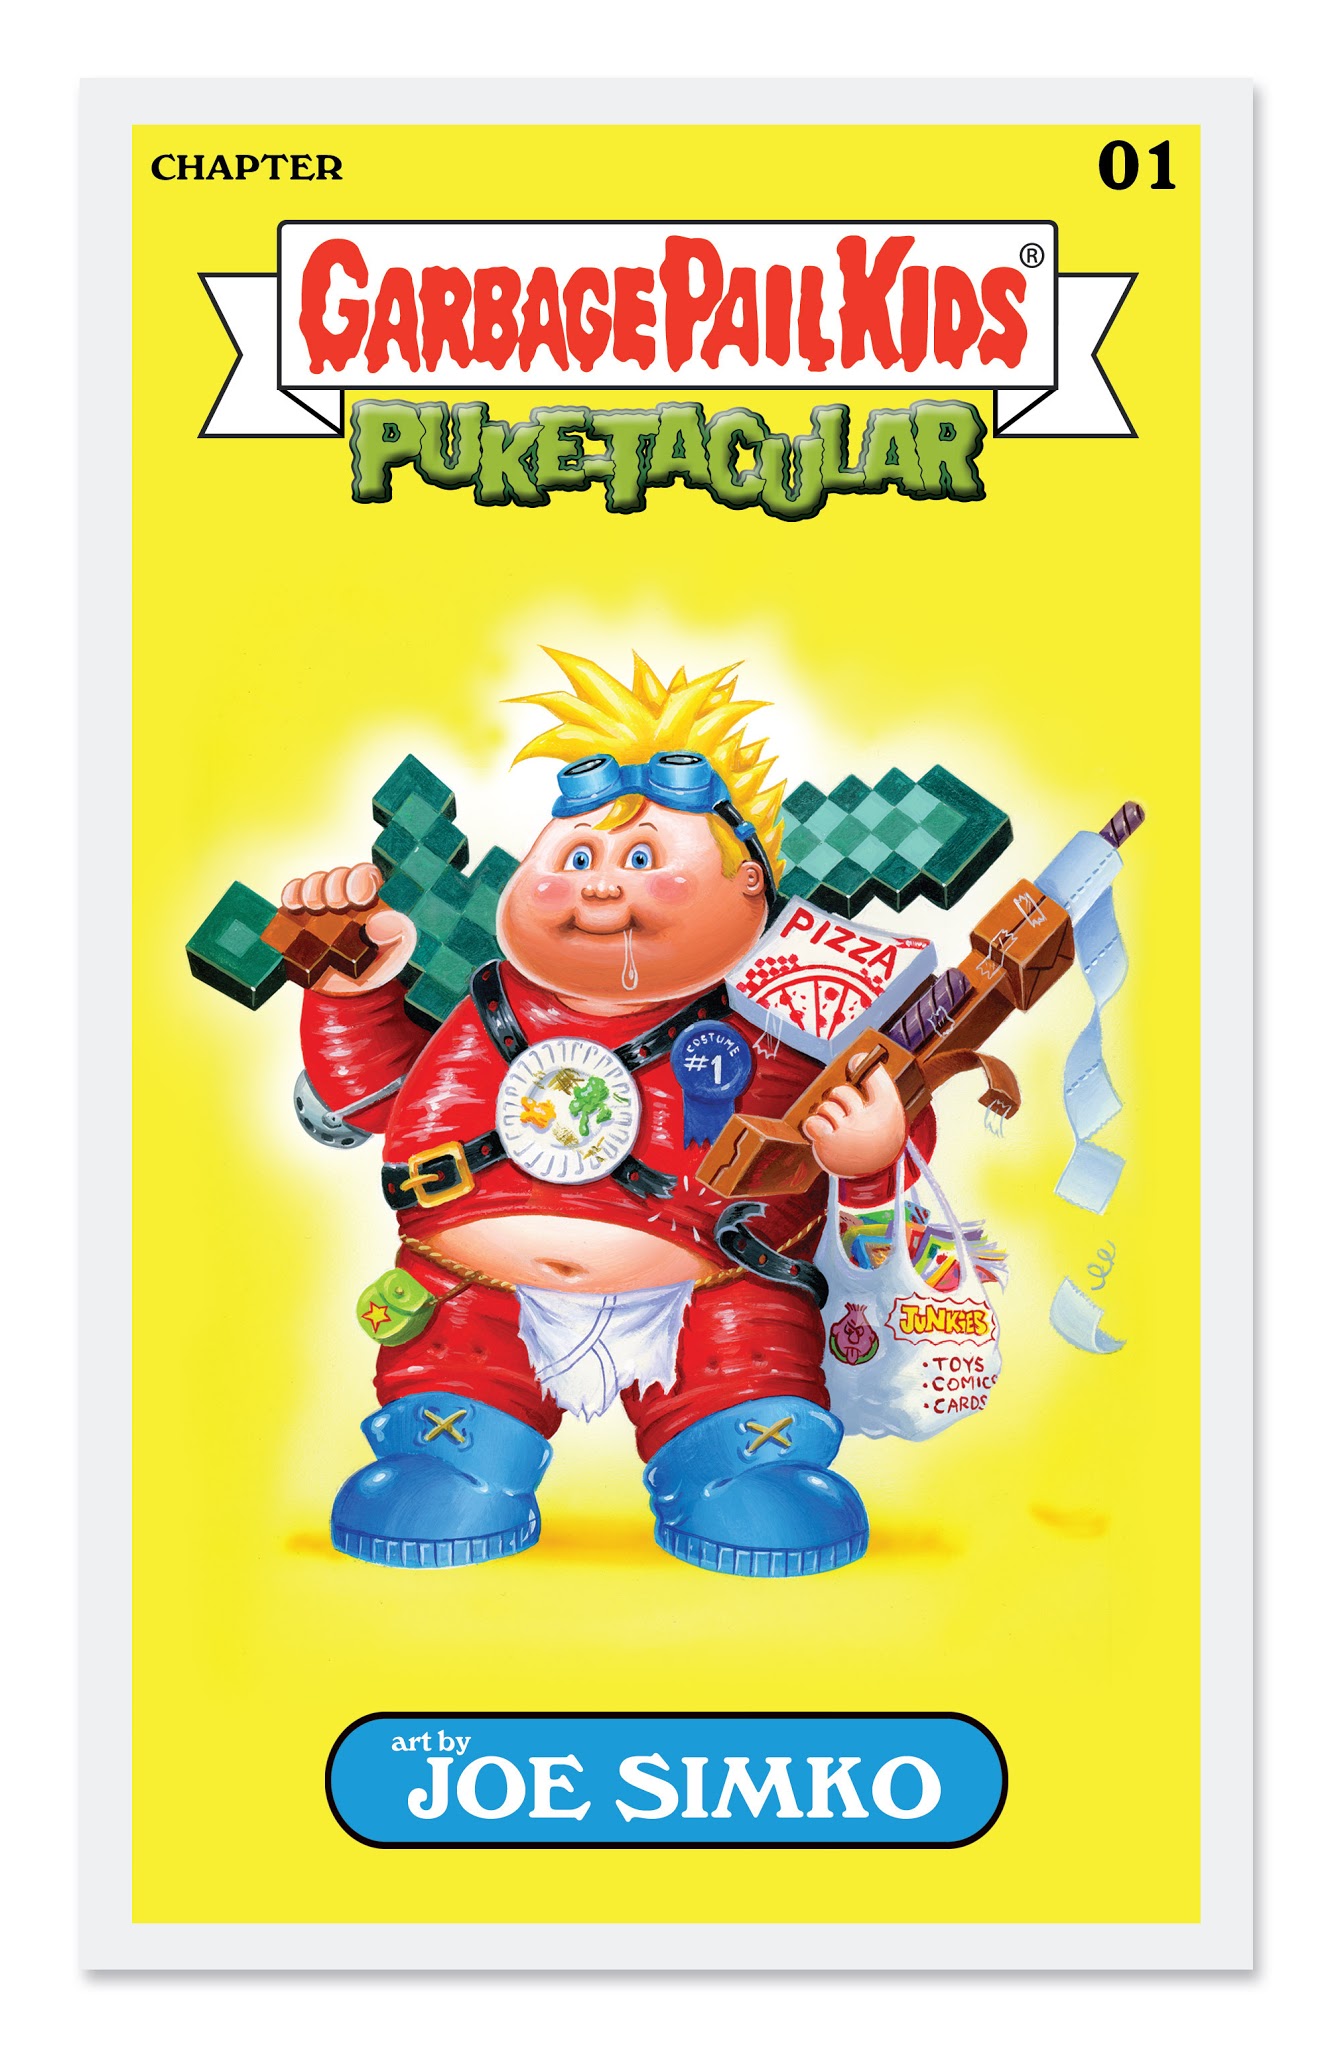 Read online Garbage Pail Kids comic -  Issue # TPB - 4